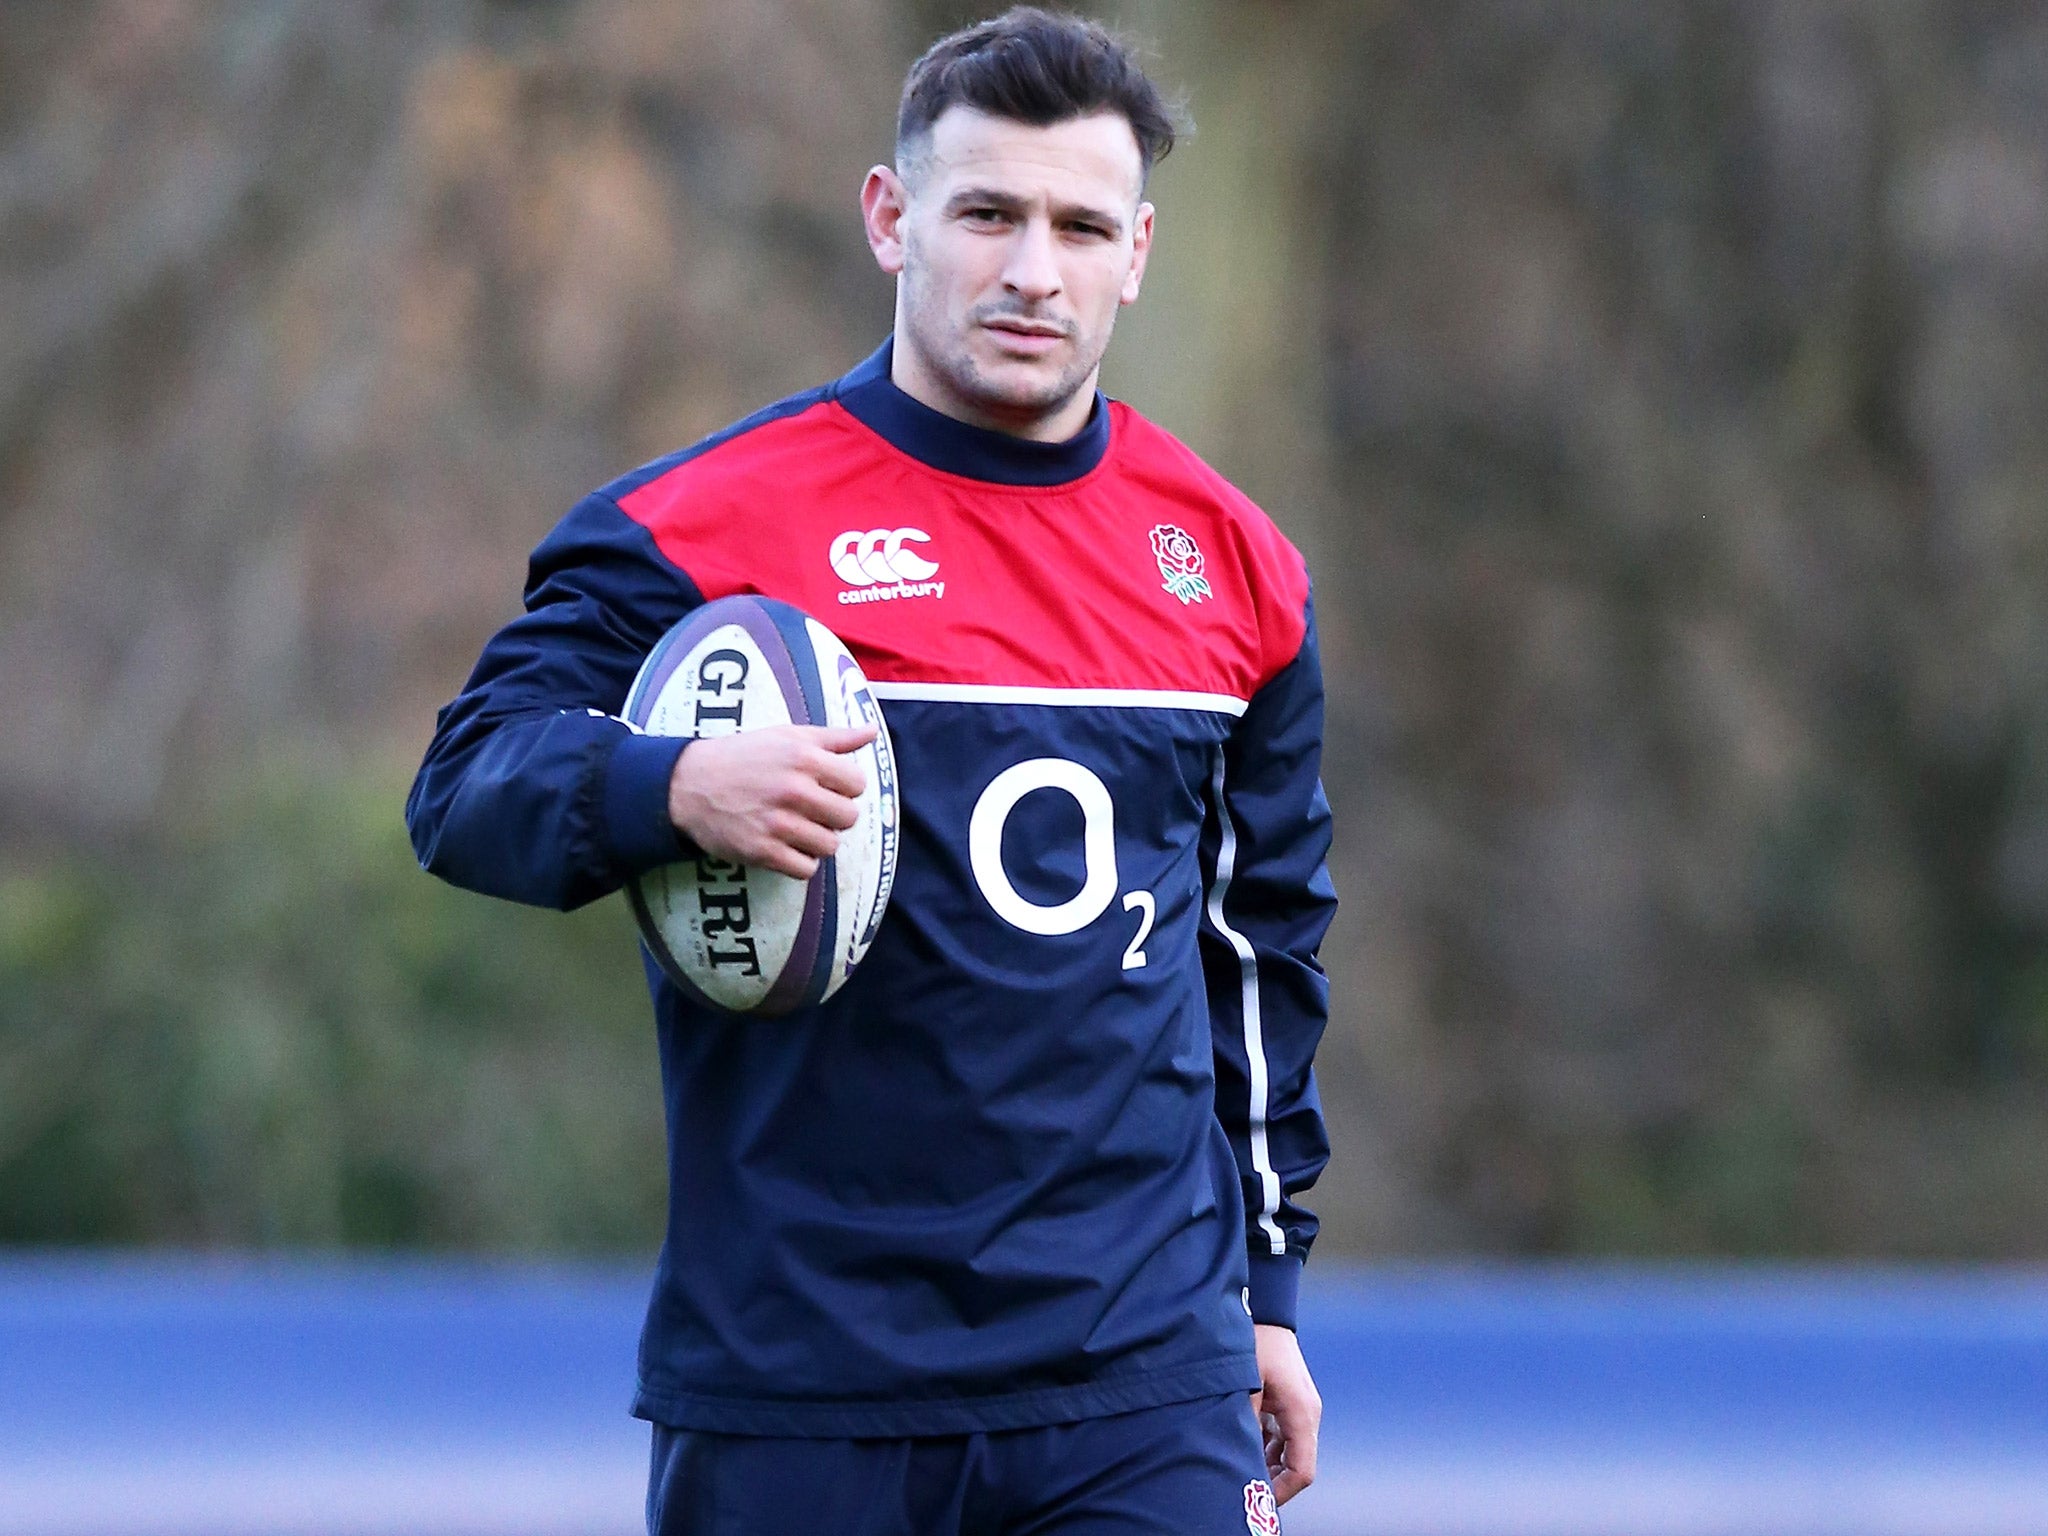 Scrum-half Danny Care has risen up the pecking order since the arrival of new coach Eddie Jones